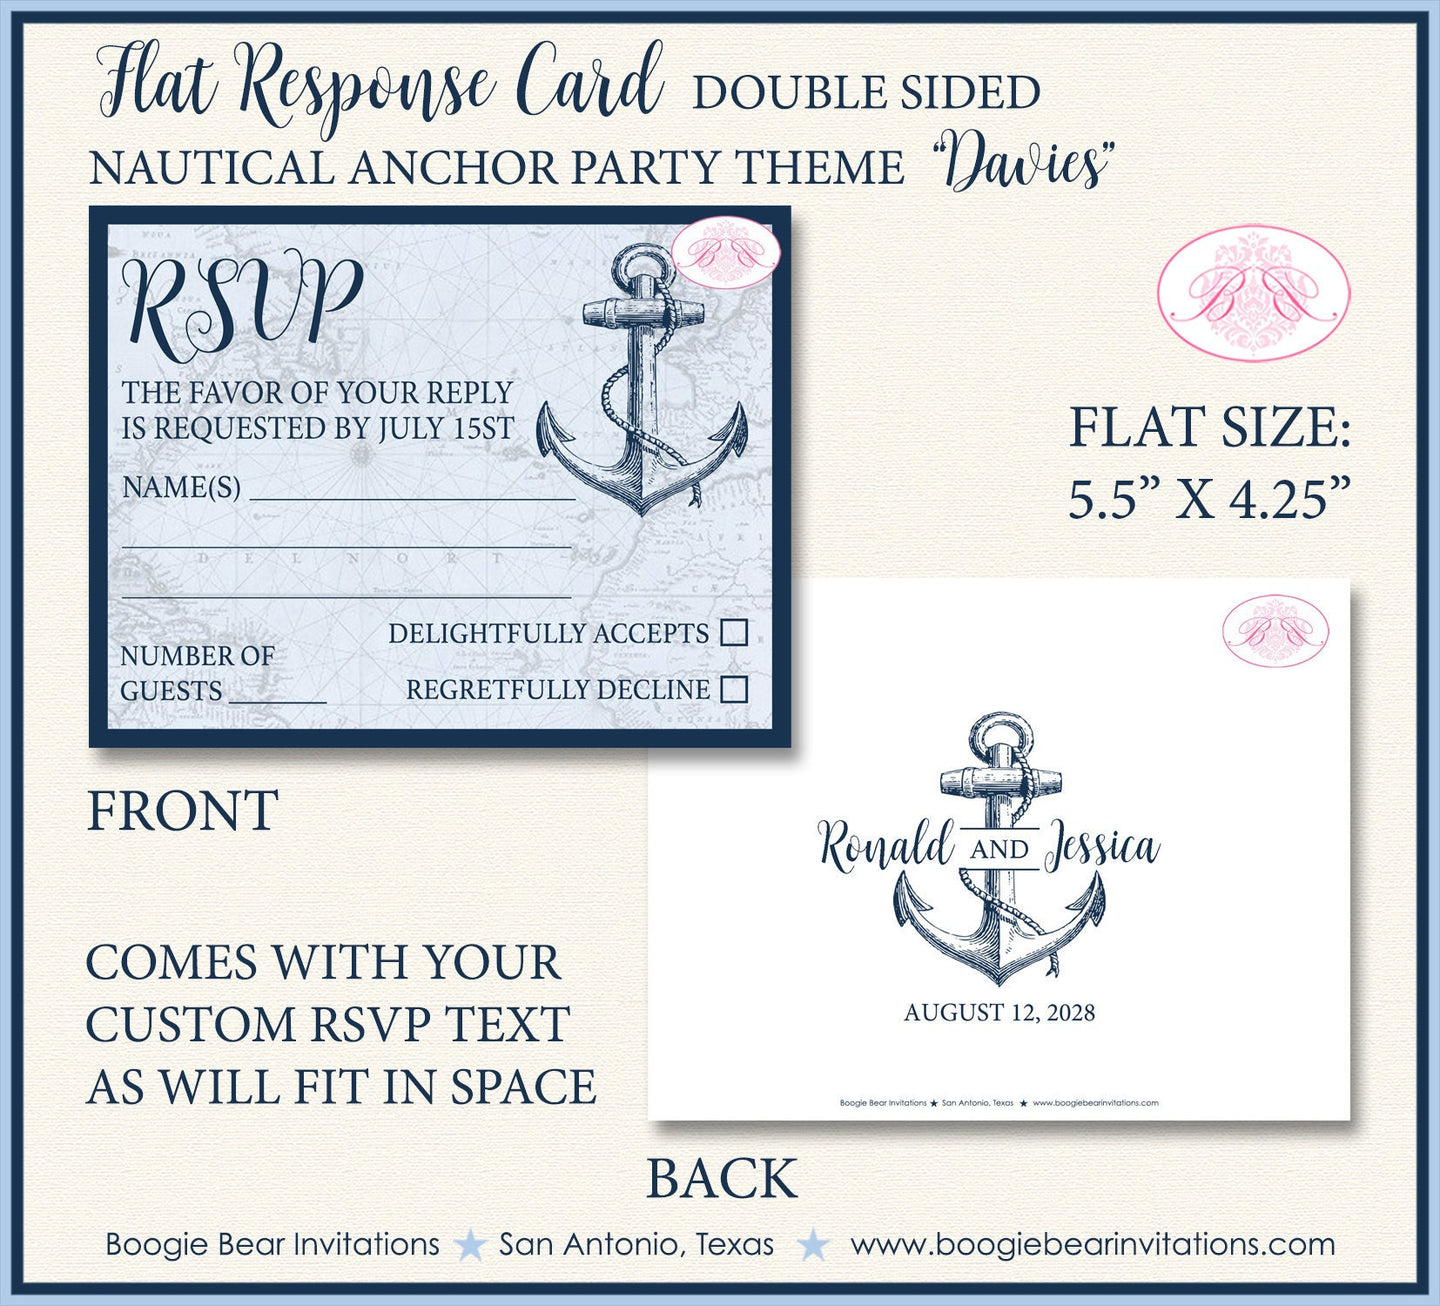 Nautical Anchor RSVP Card Birthday Party Response Reply Guest Blue Map Boating Ocean Tie Knot Boogie Bear Invitations Davies Theme Printed